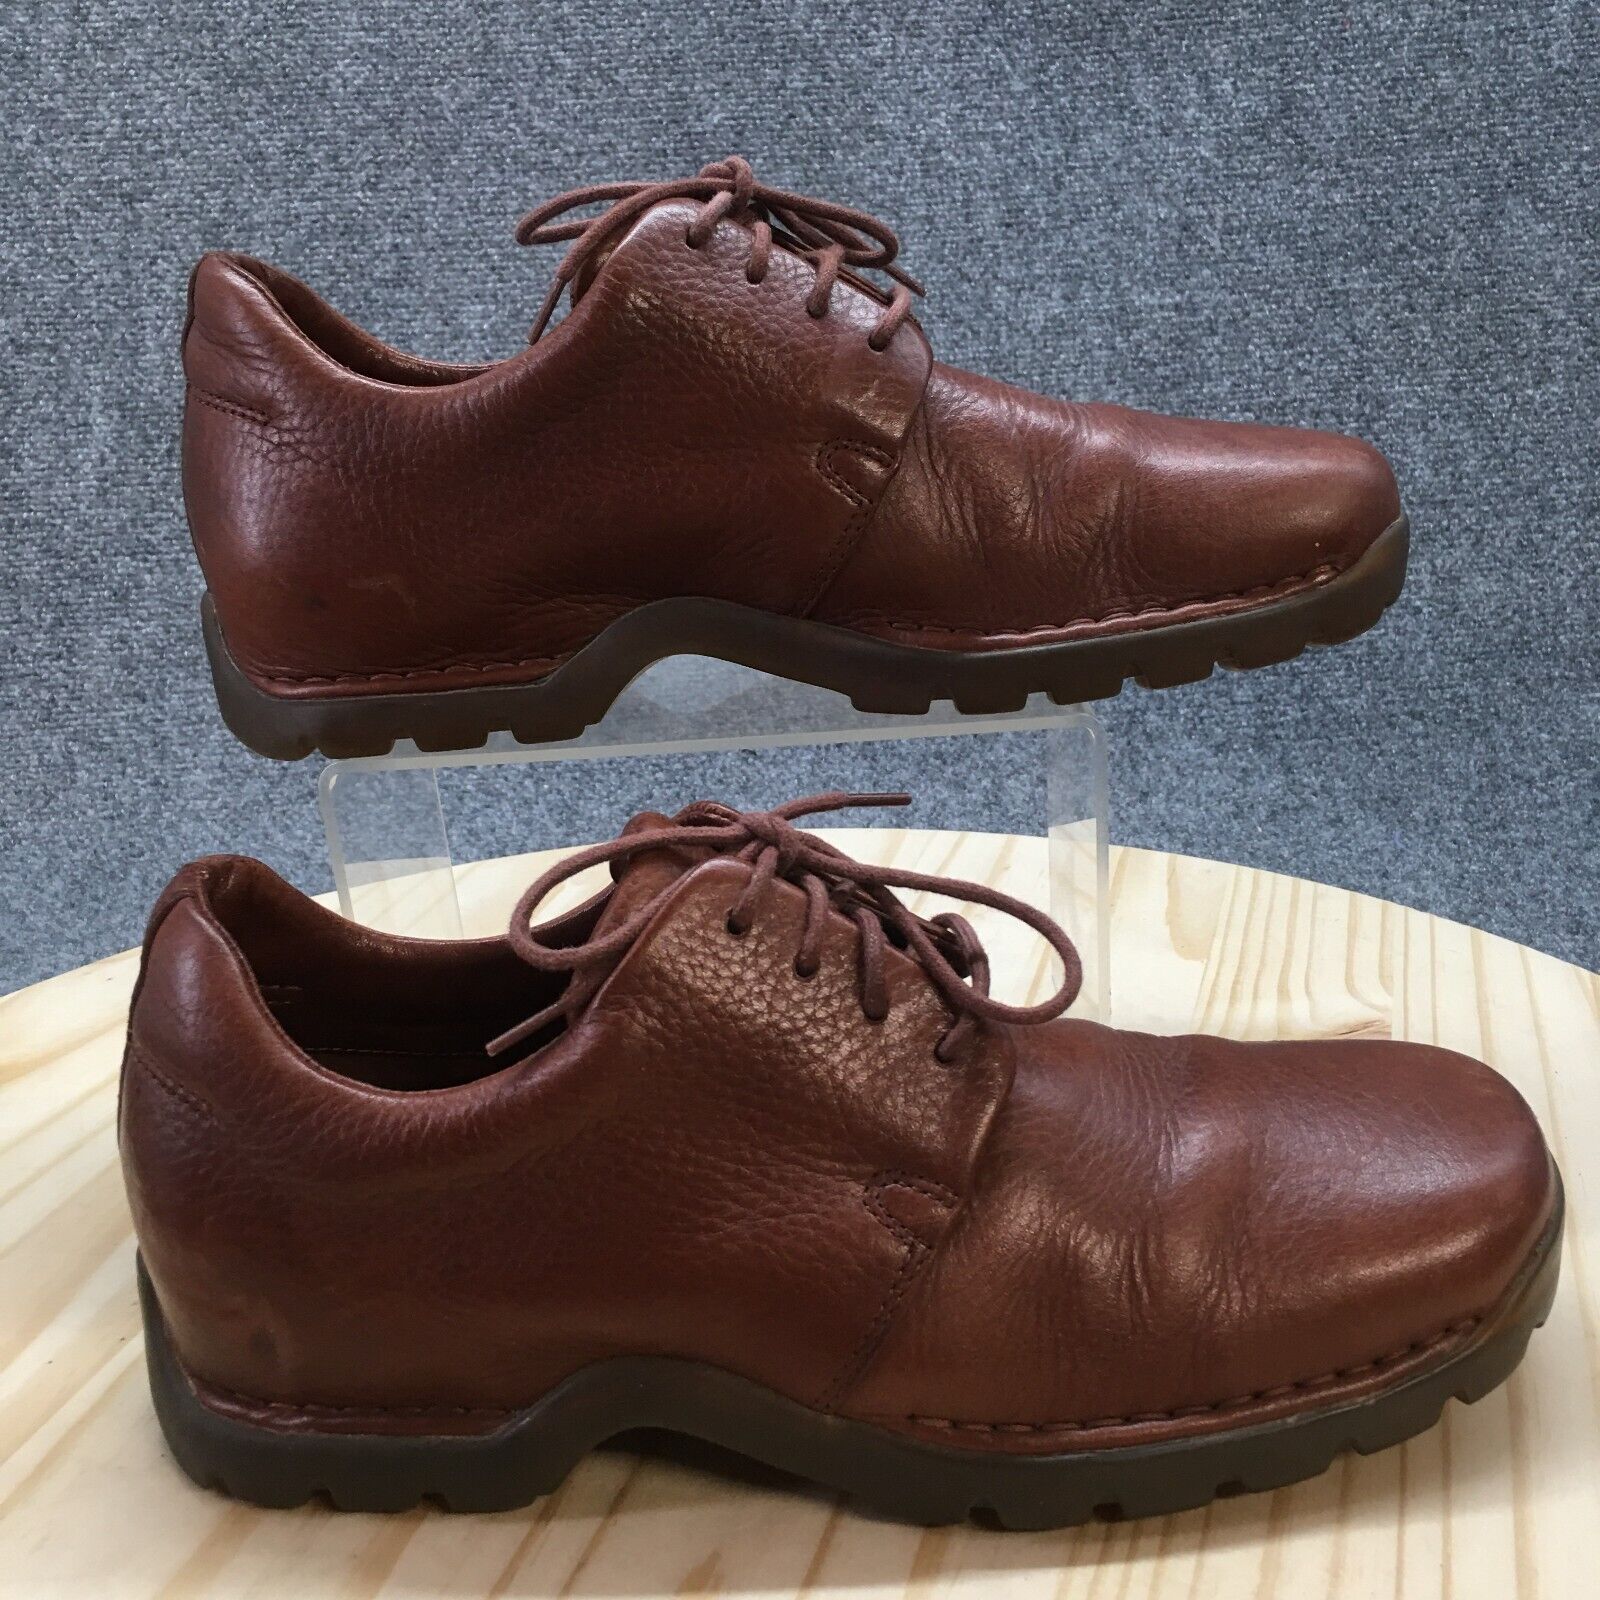 Cole Haan Shoes Mens 9.5 M Country Plain Toe Oxford C00875 Brown Leather Lace Up